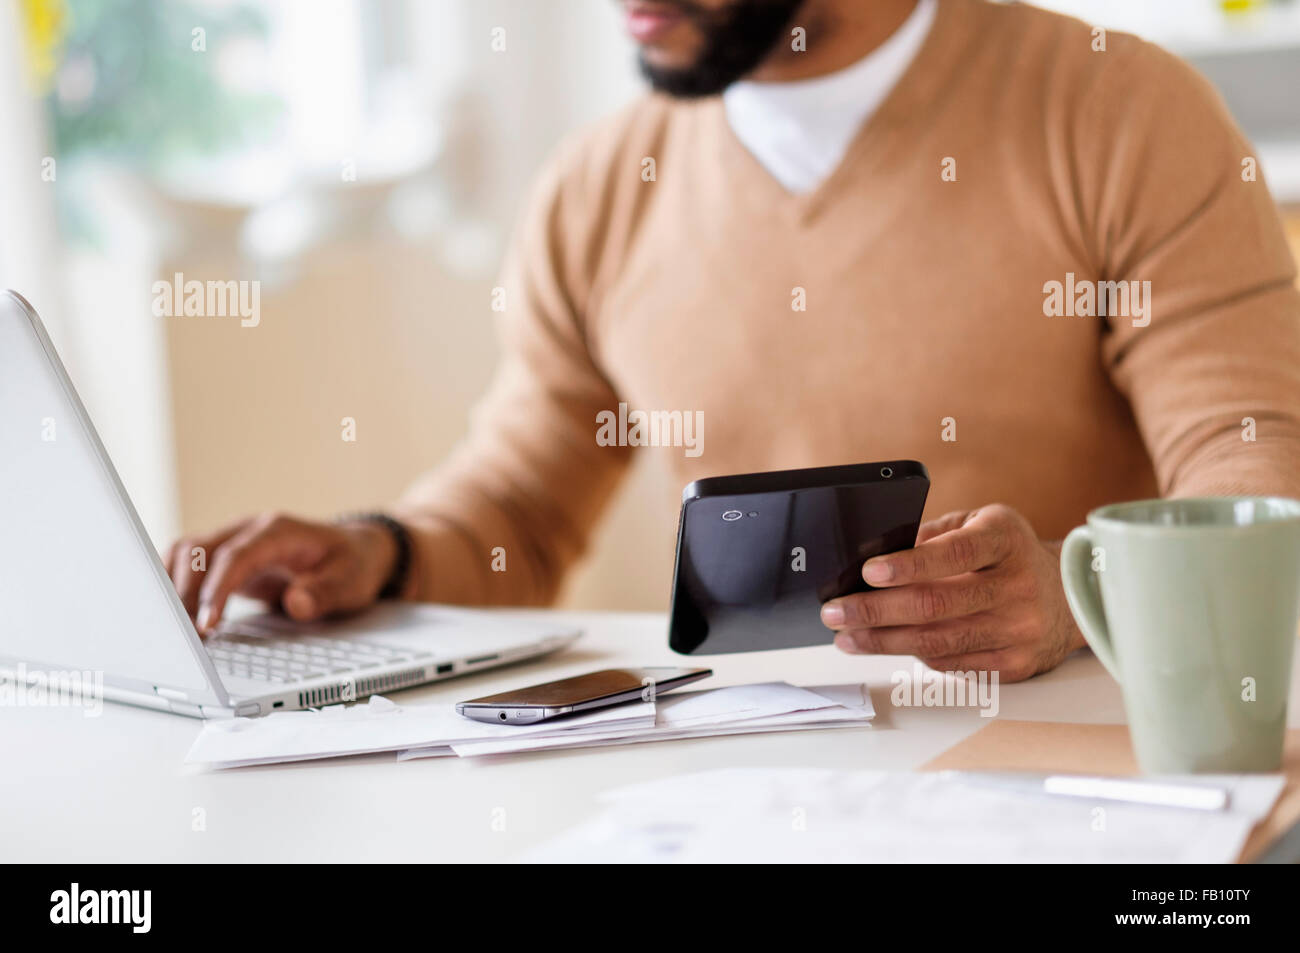 Man working with laptop at table and holding digital tablet Stock Photo